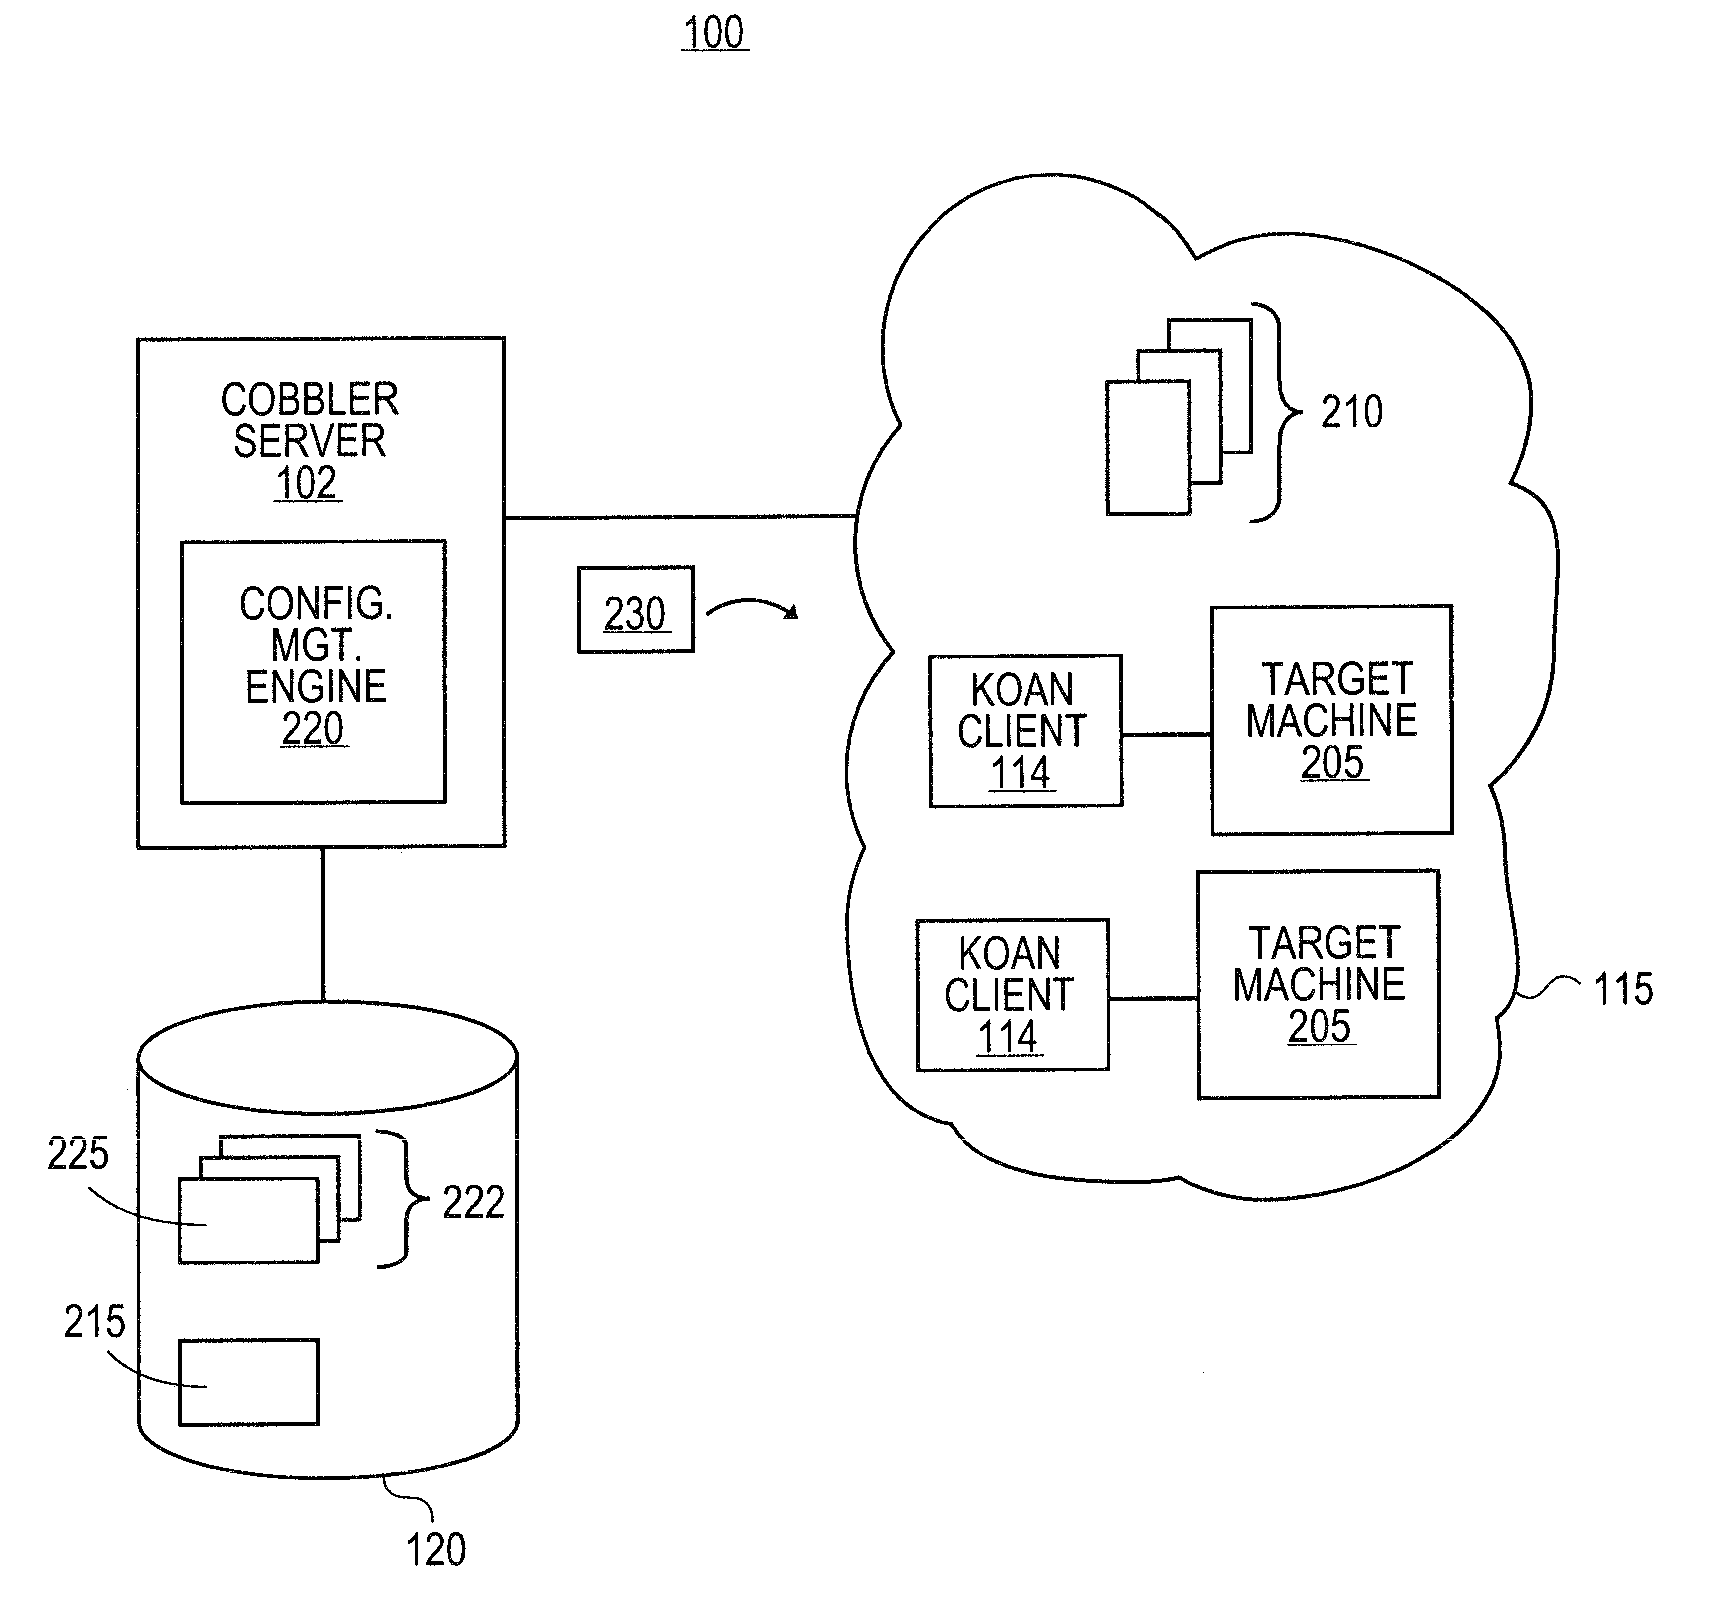 Systems and methods for providing configuration management services from a provisioning server